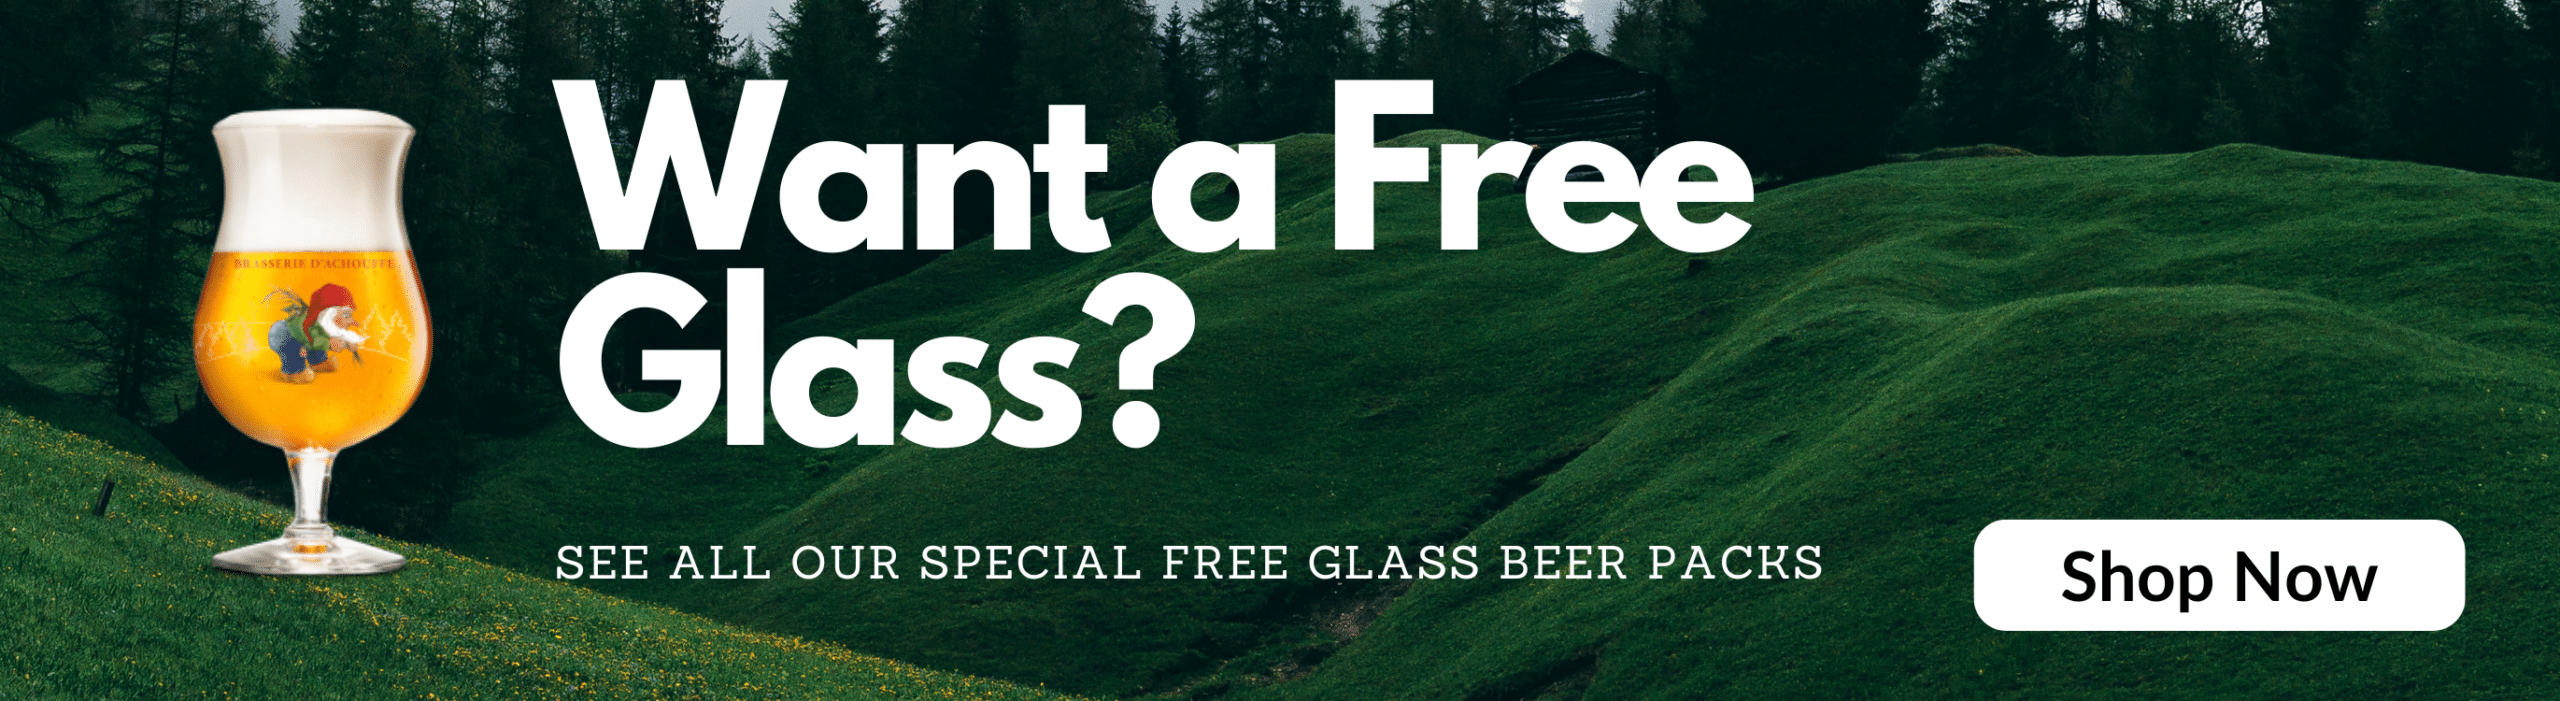 Free Glass Offer